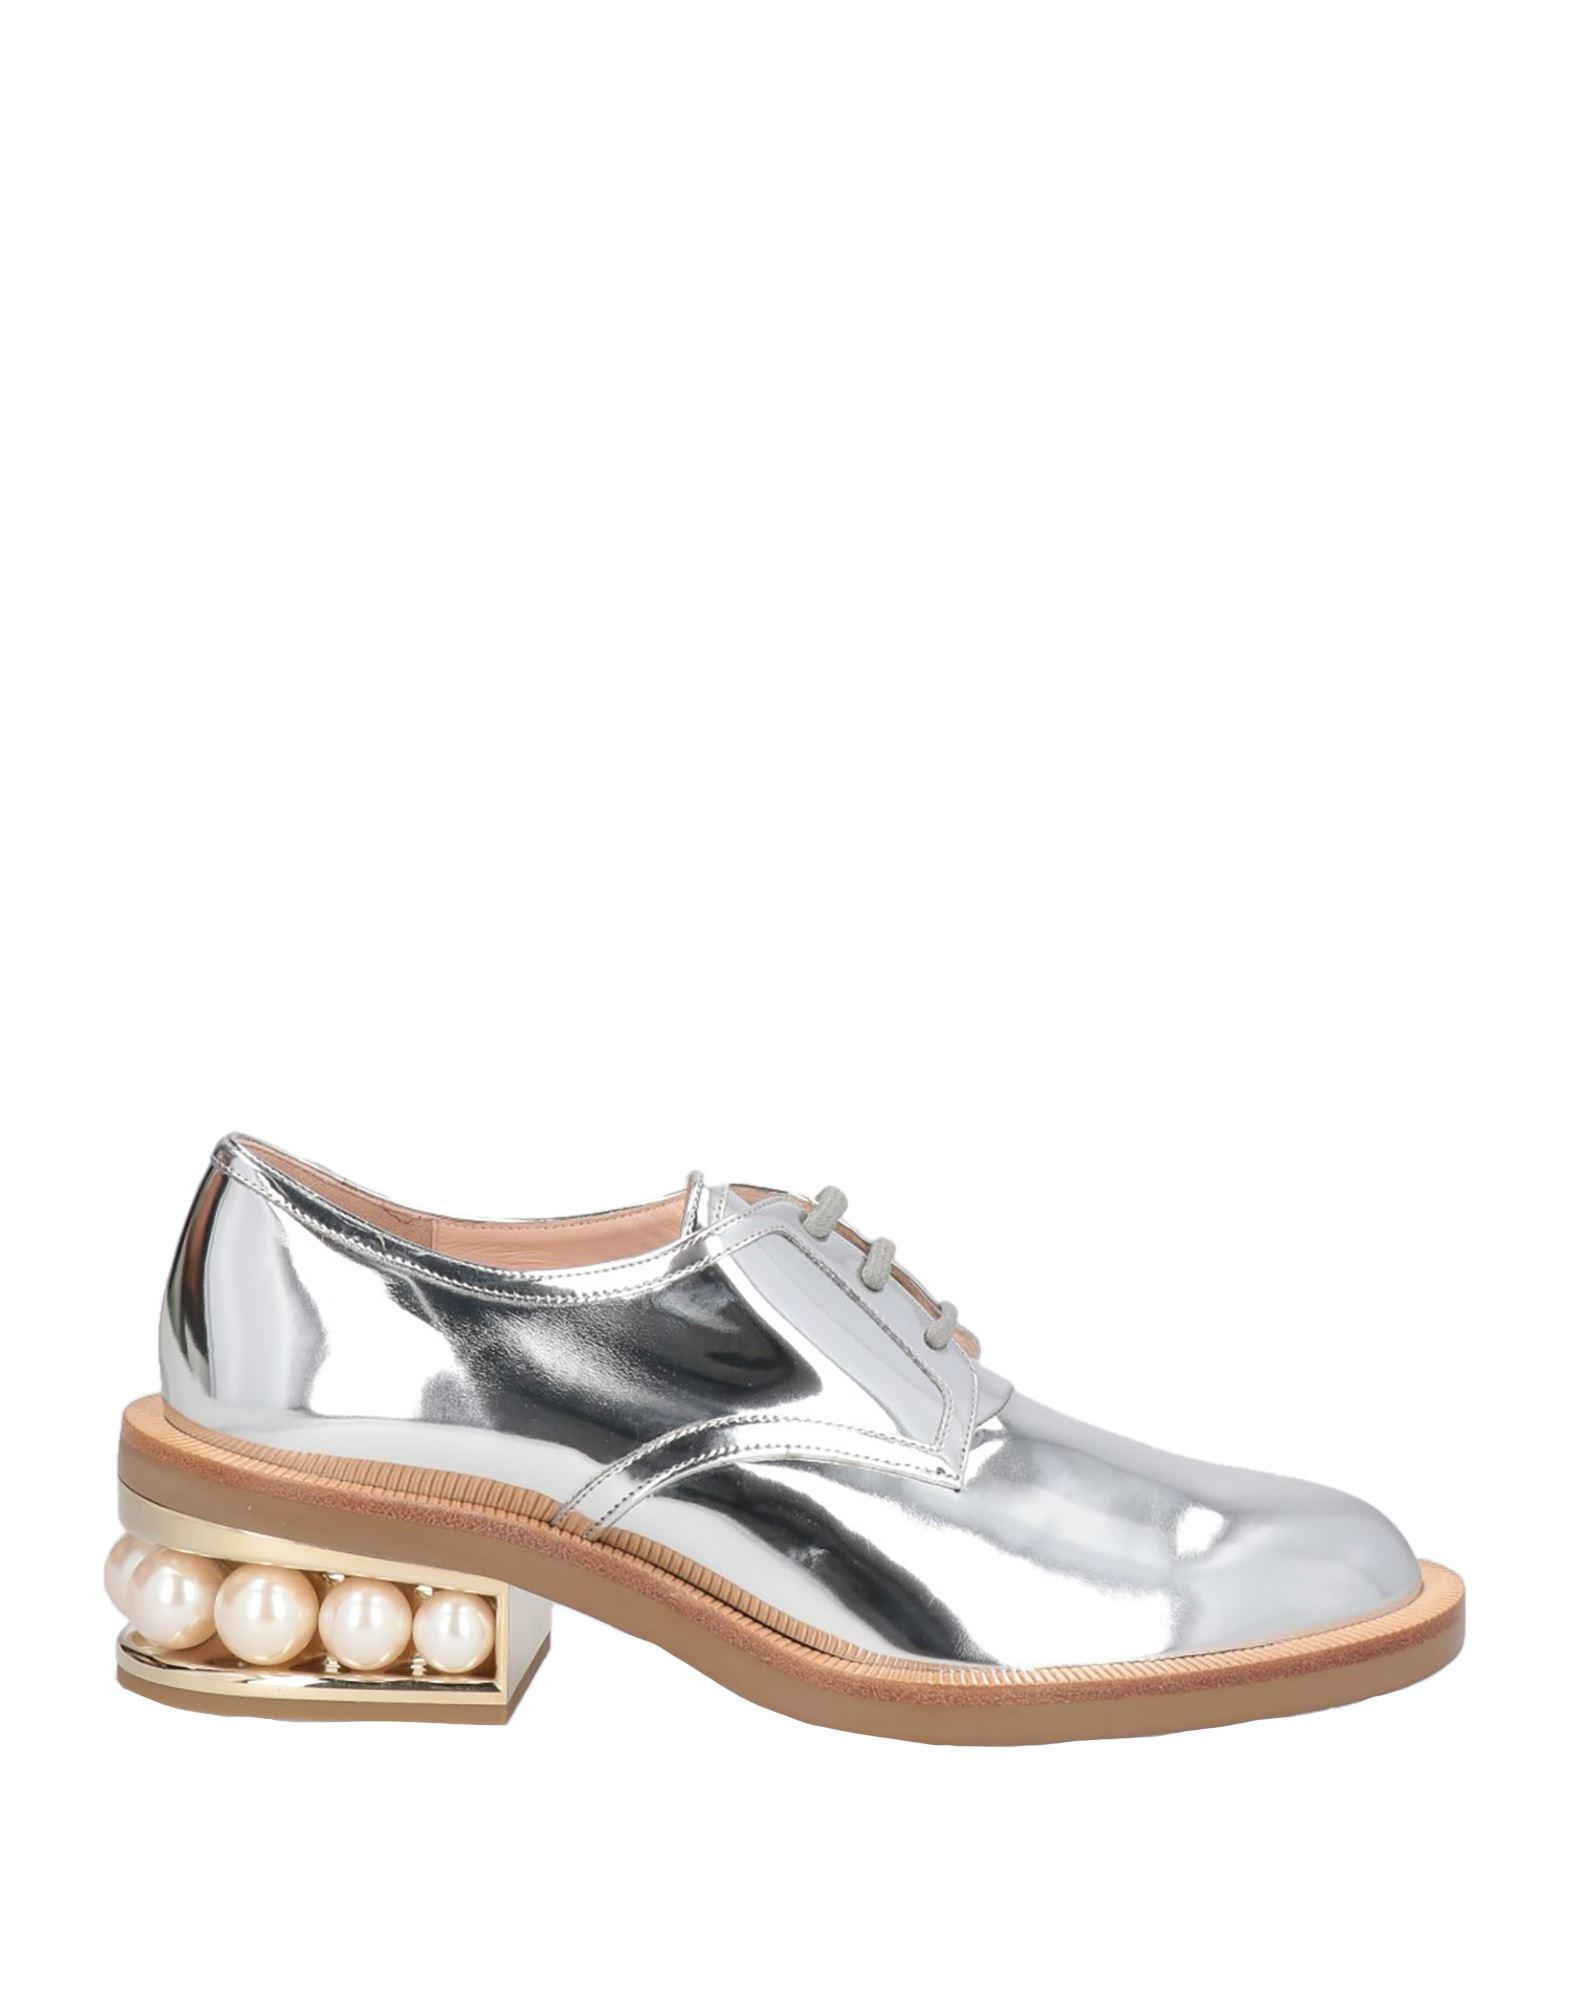 Nicholas Kirkwood Lace-up Shoes in White